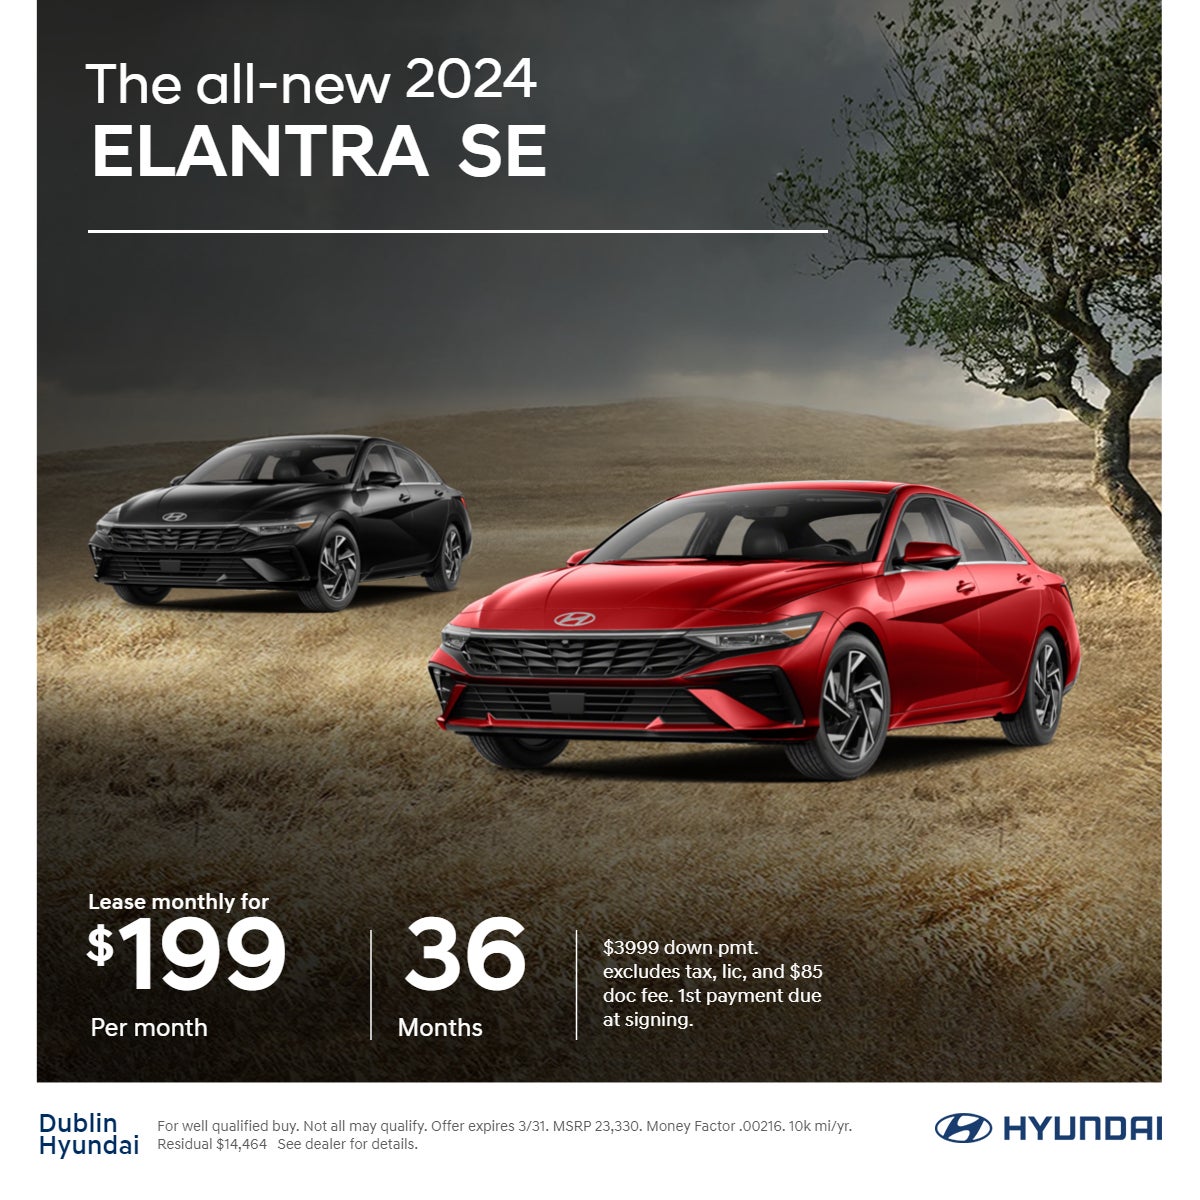 Lease a 2024 Elantra for 199 per month.